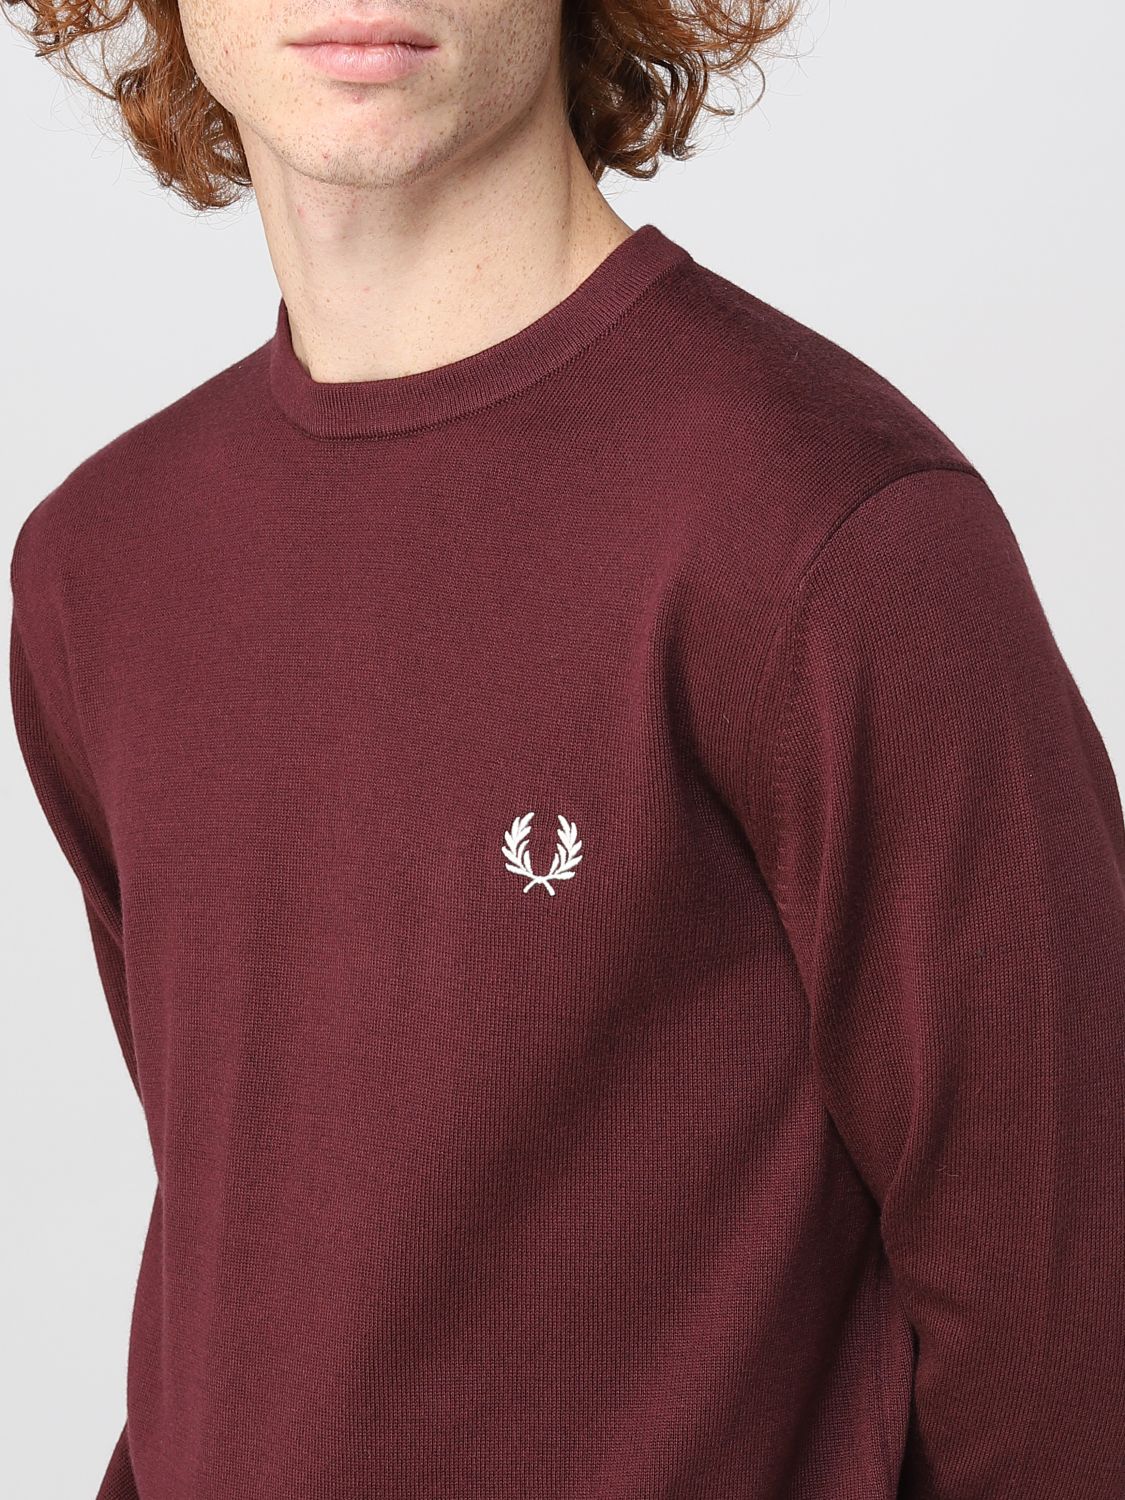 Jersey Fred Perry: Jersey Fred Perry para hombre granate 3